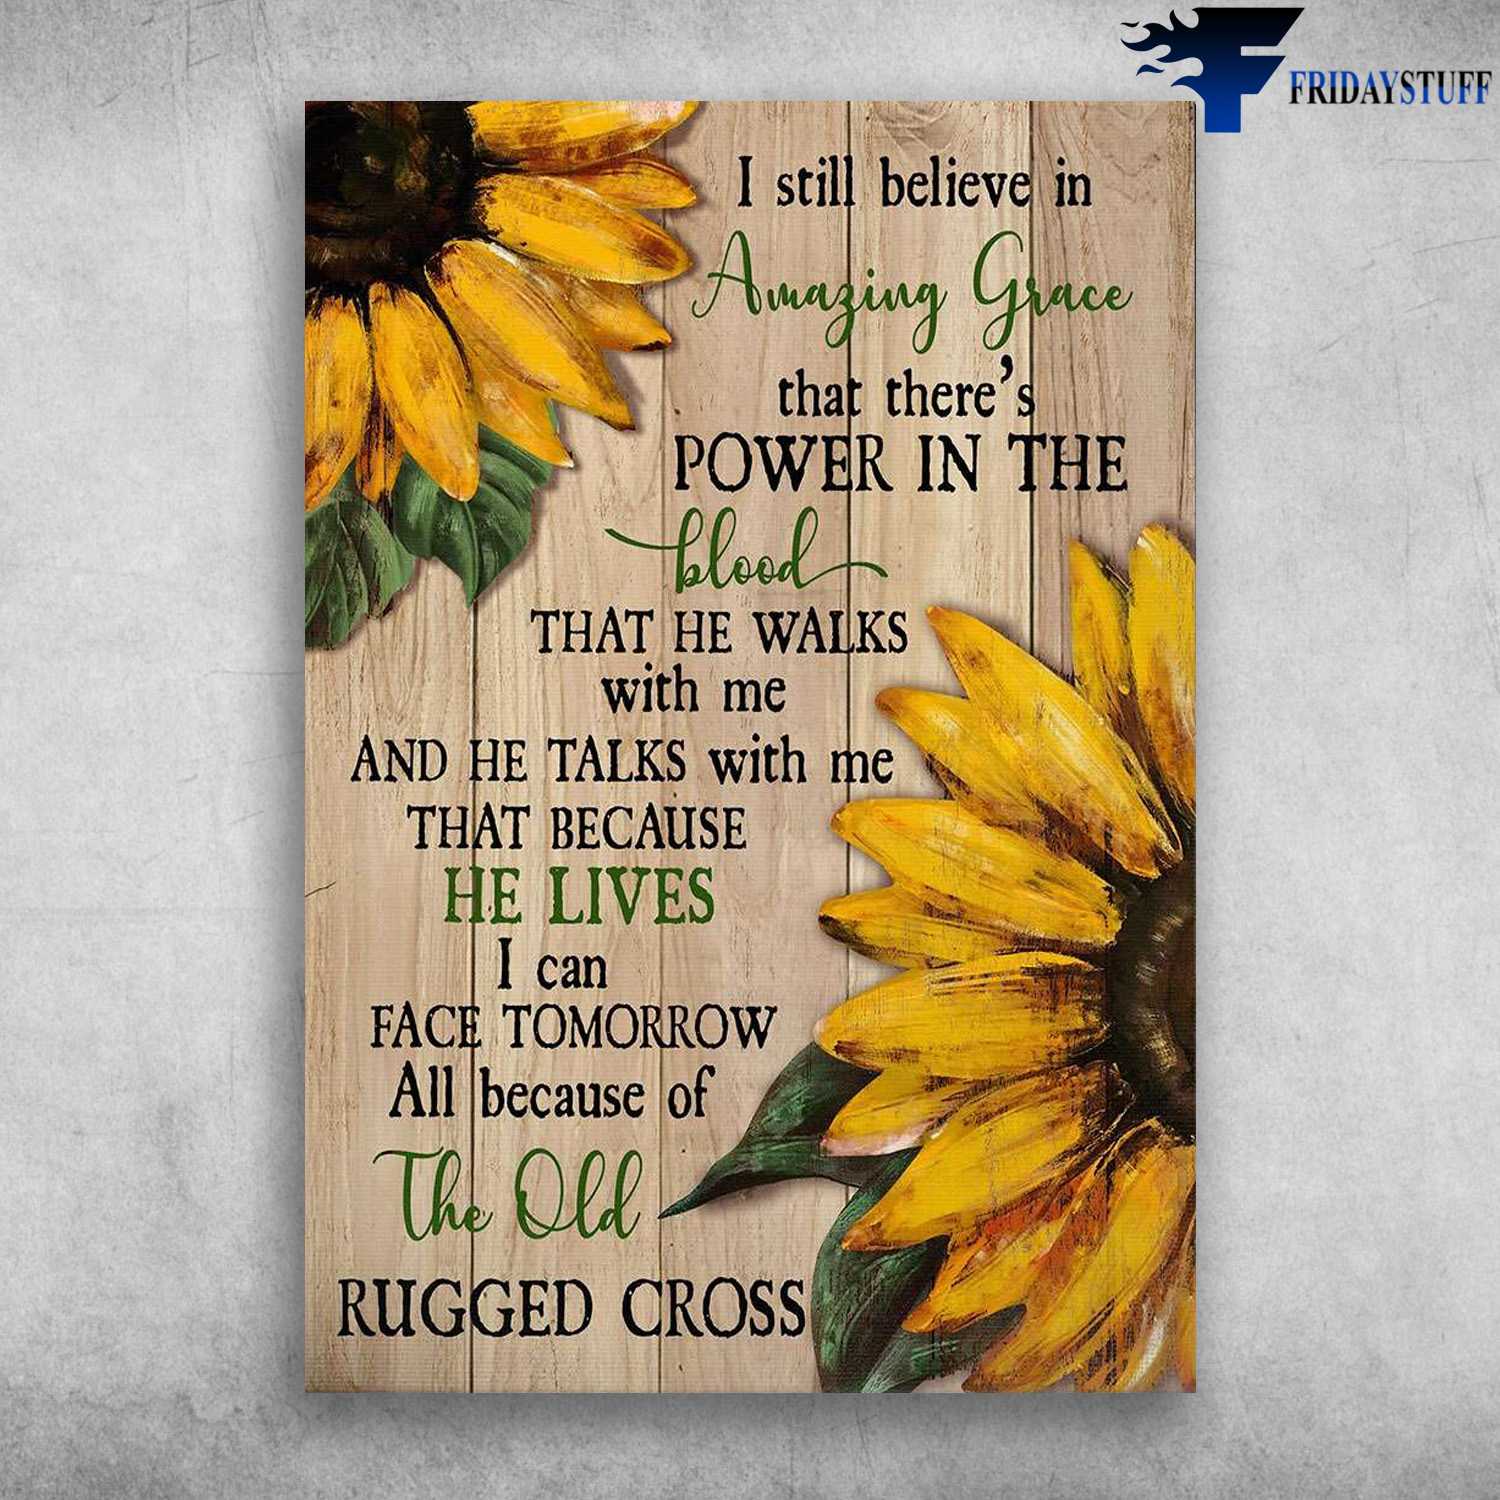 Sunflower Canvas - I Still Believe In Amazing Grace, That There's Power In The Blood, That He Walks With Me, And He Talks With Me, And He Talks With Me, That Because He Lives, All Because Of The Old